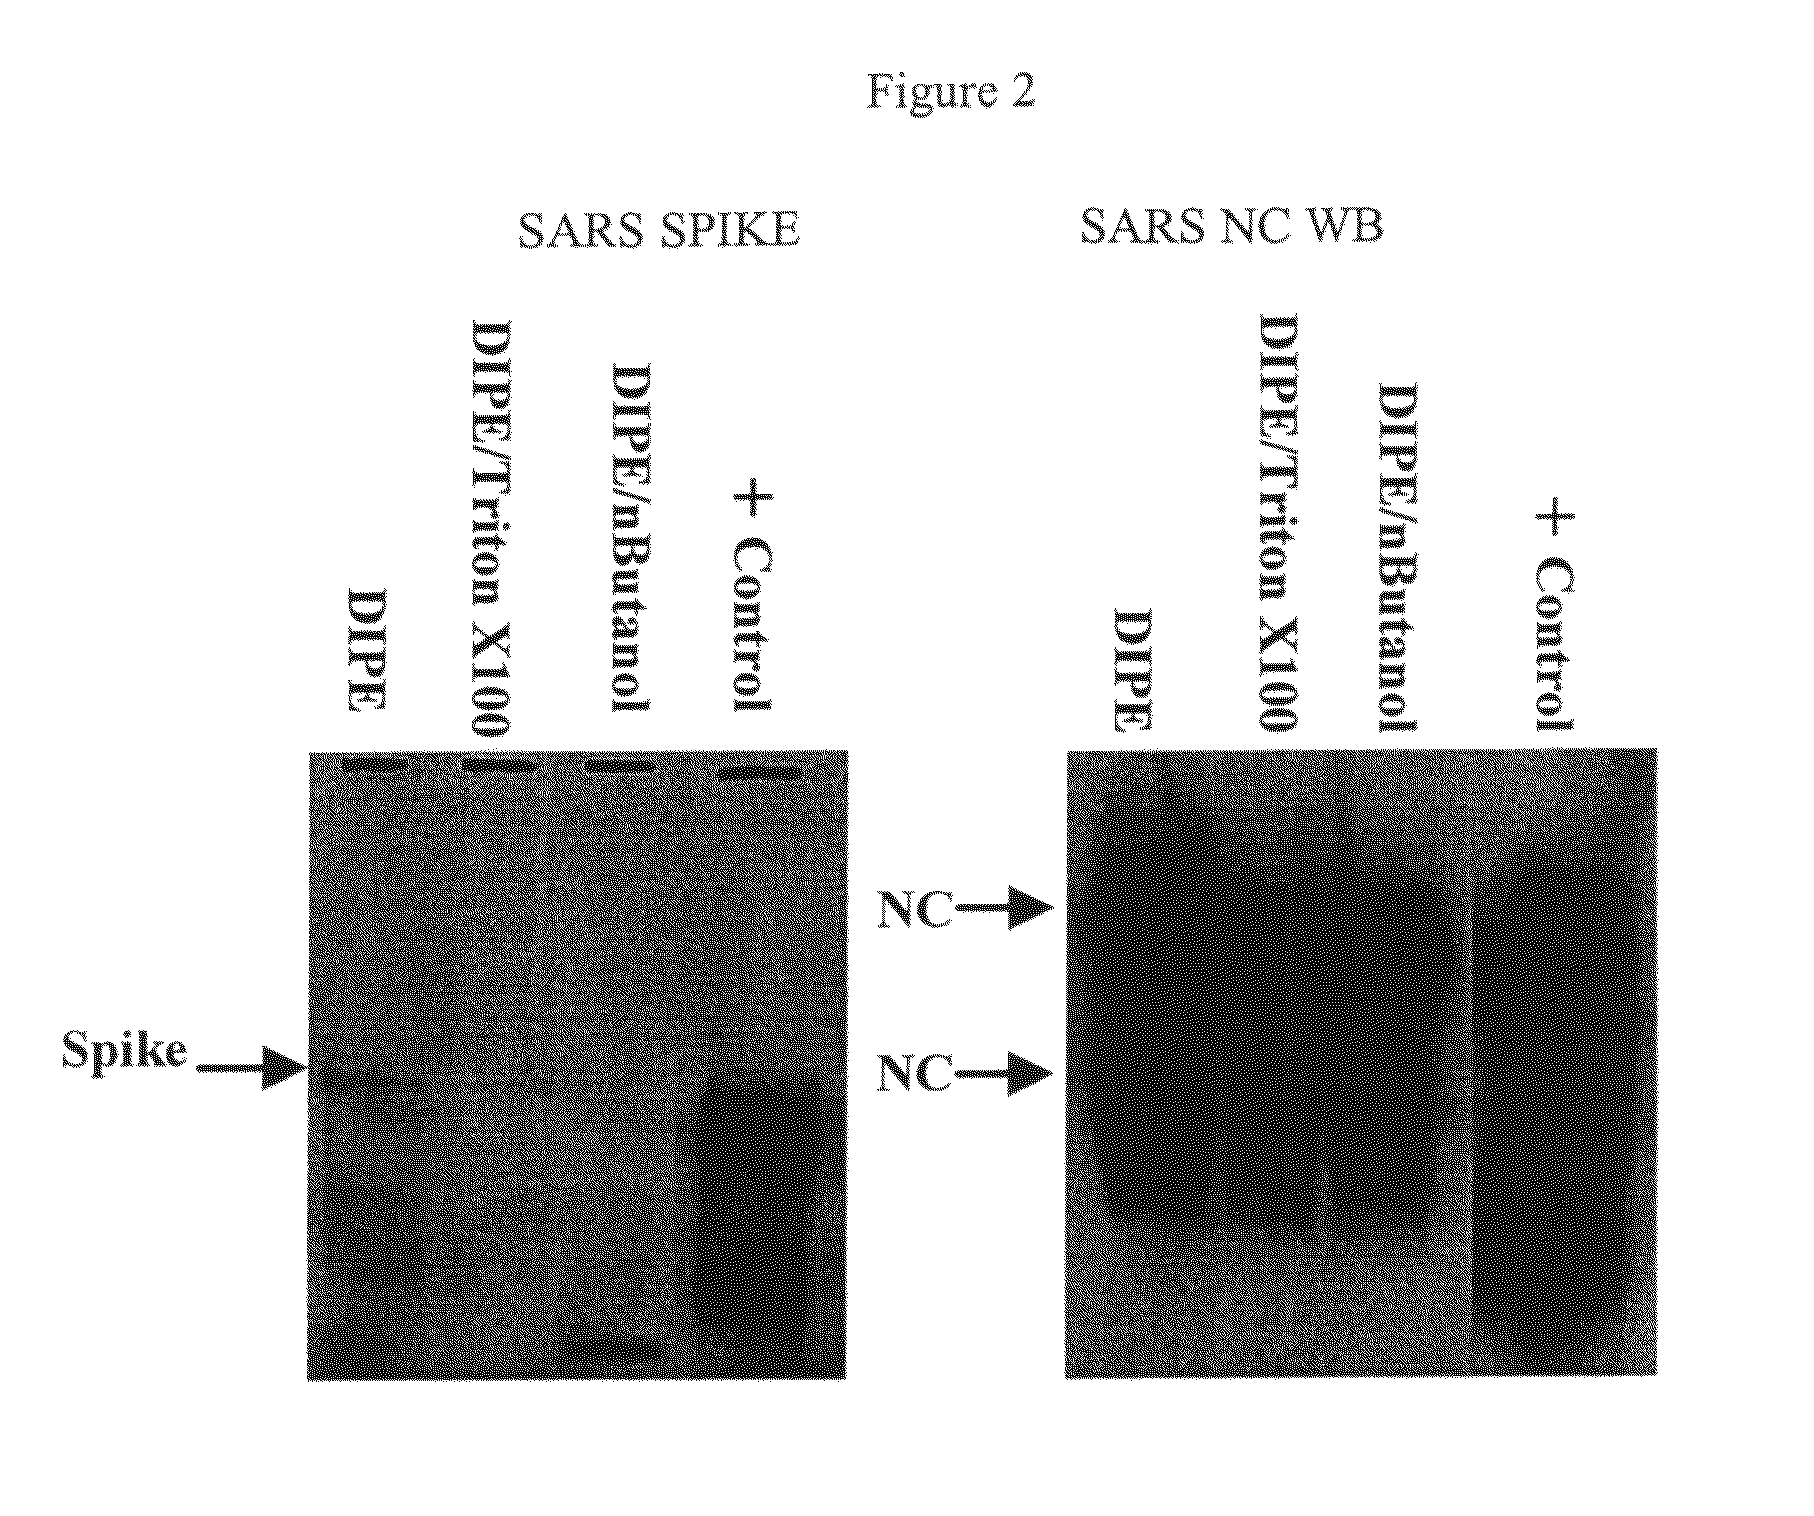 SARS vaccine compositions and methods of making and using them